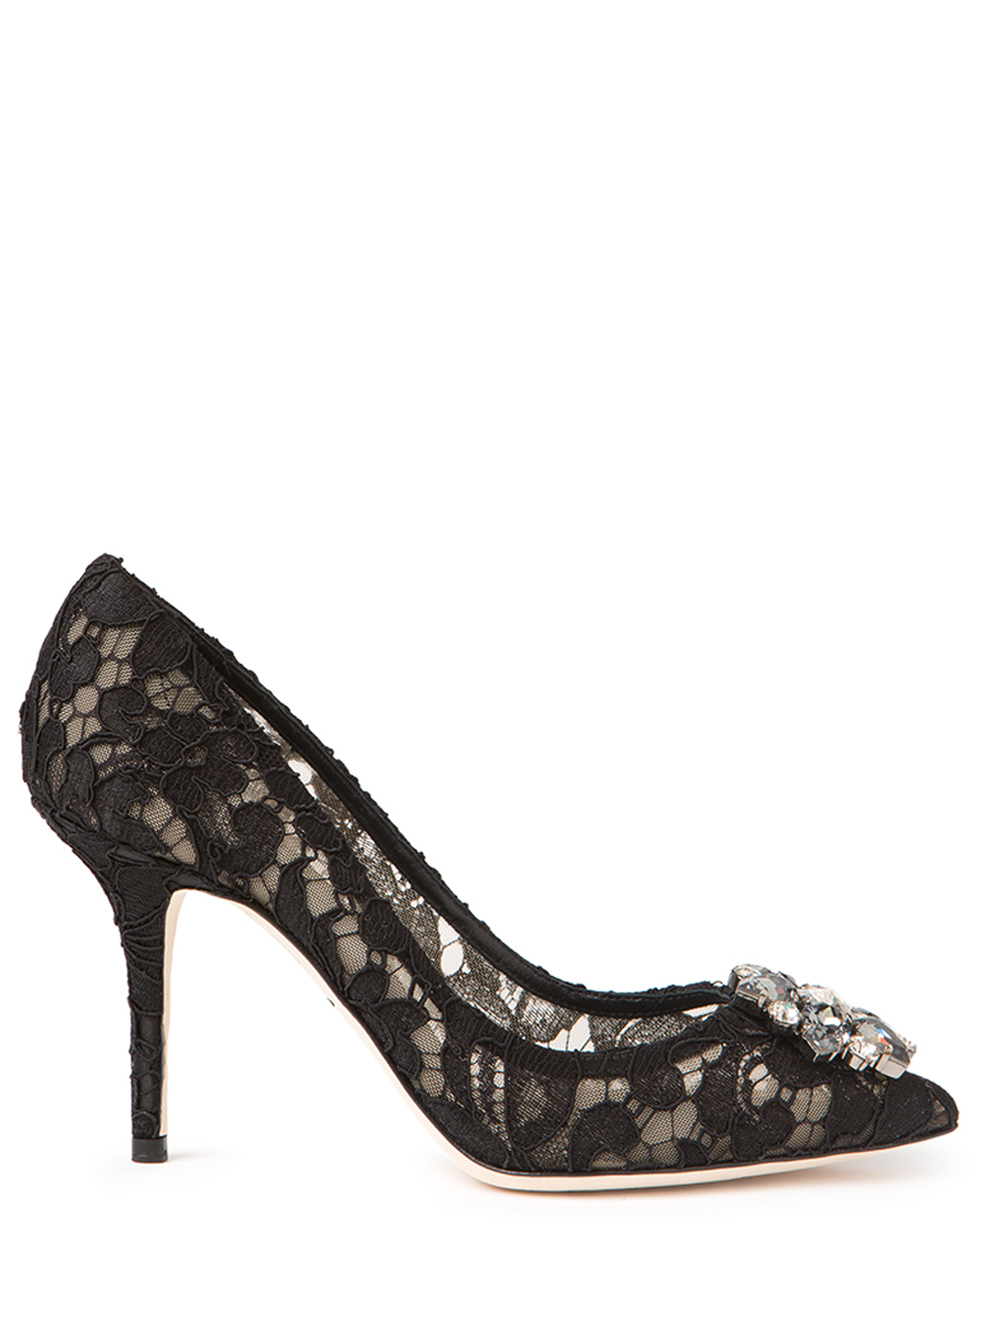 Dolce & Gabbana Lace And Crystal Pumps in Black - Lyst